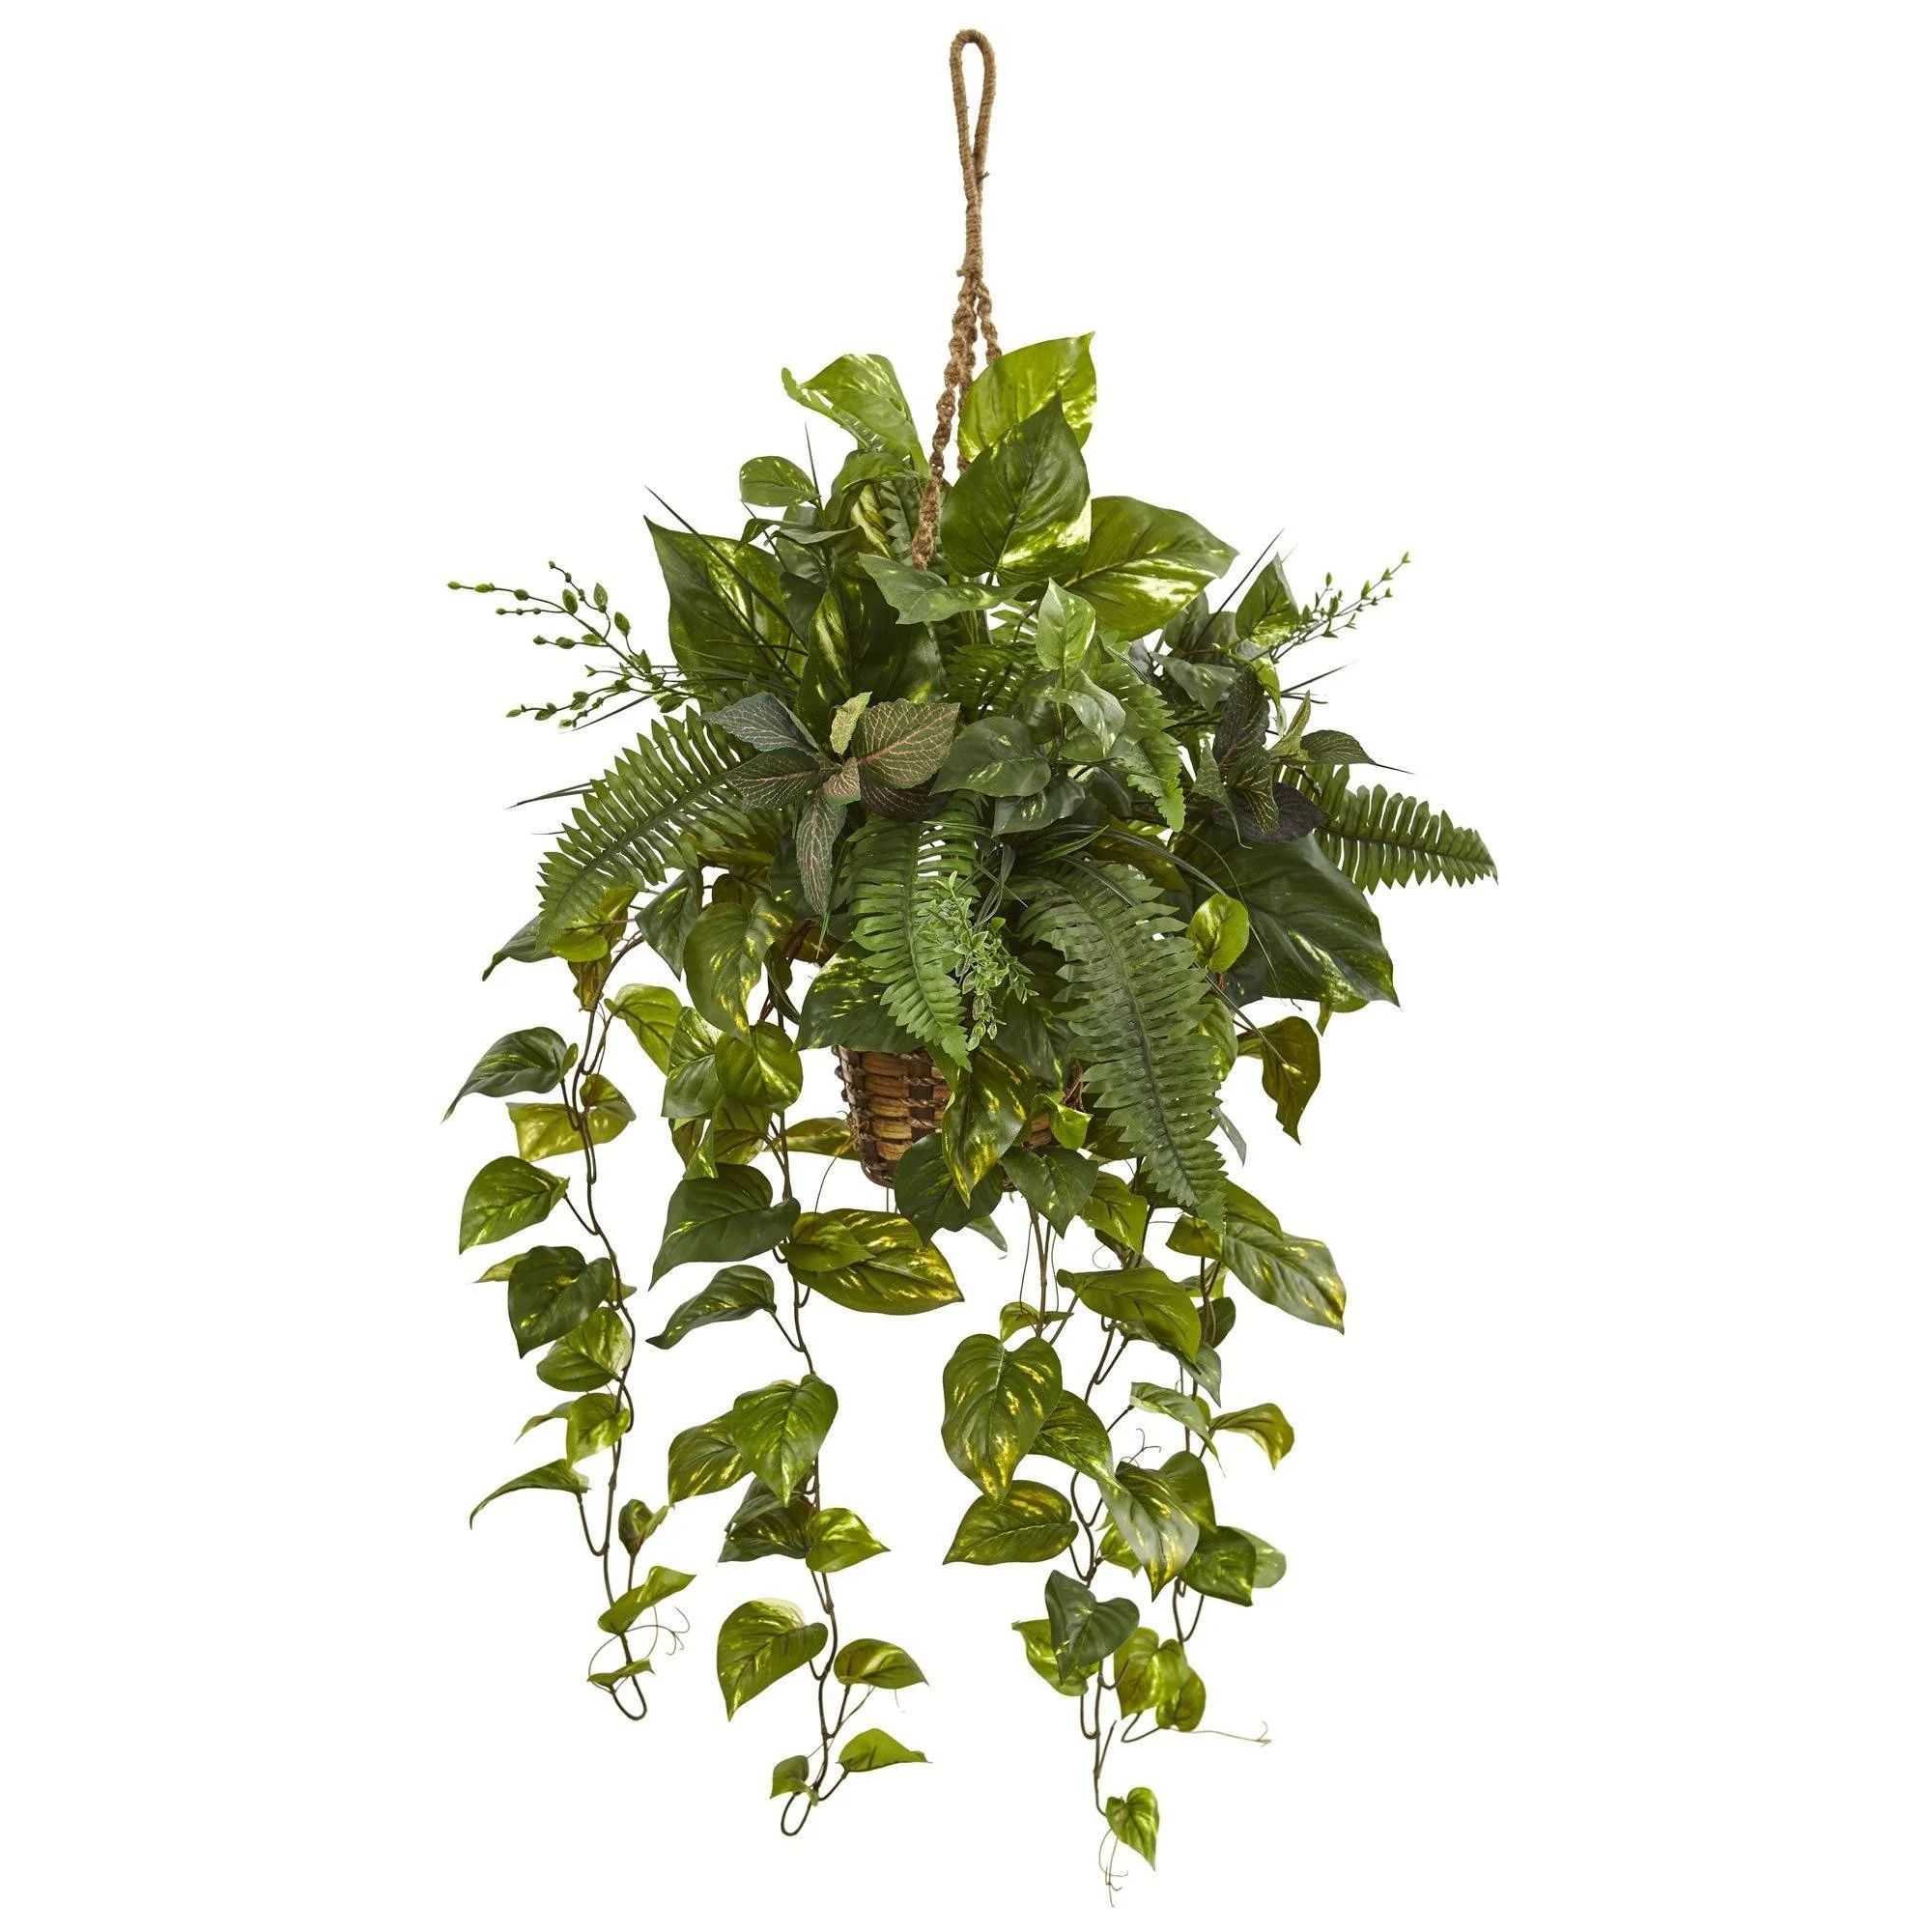 Mixed Pothos and Boston Fern in Hanging Basket | Nearly Natural | Nearly Natural